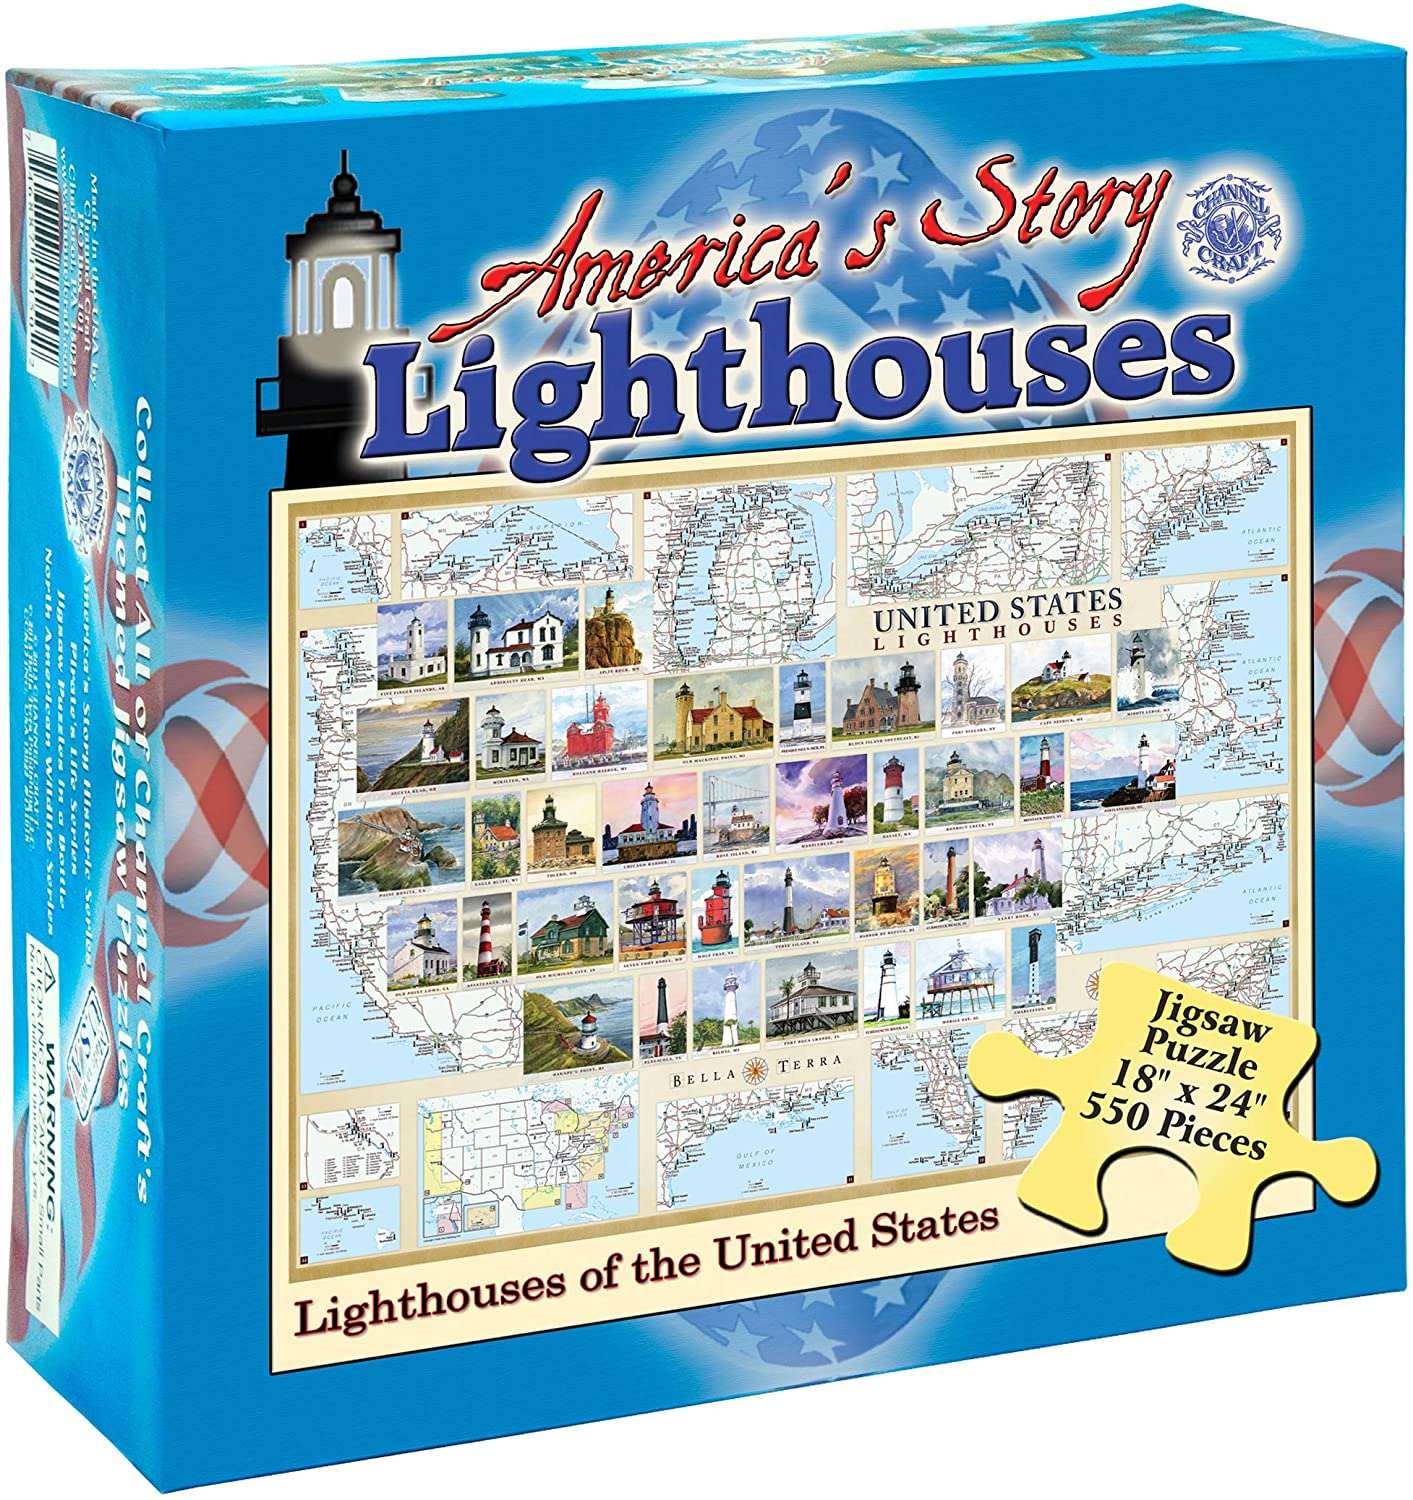 Lighthouses - America's Story 550 pieces